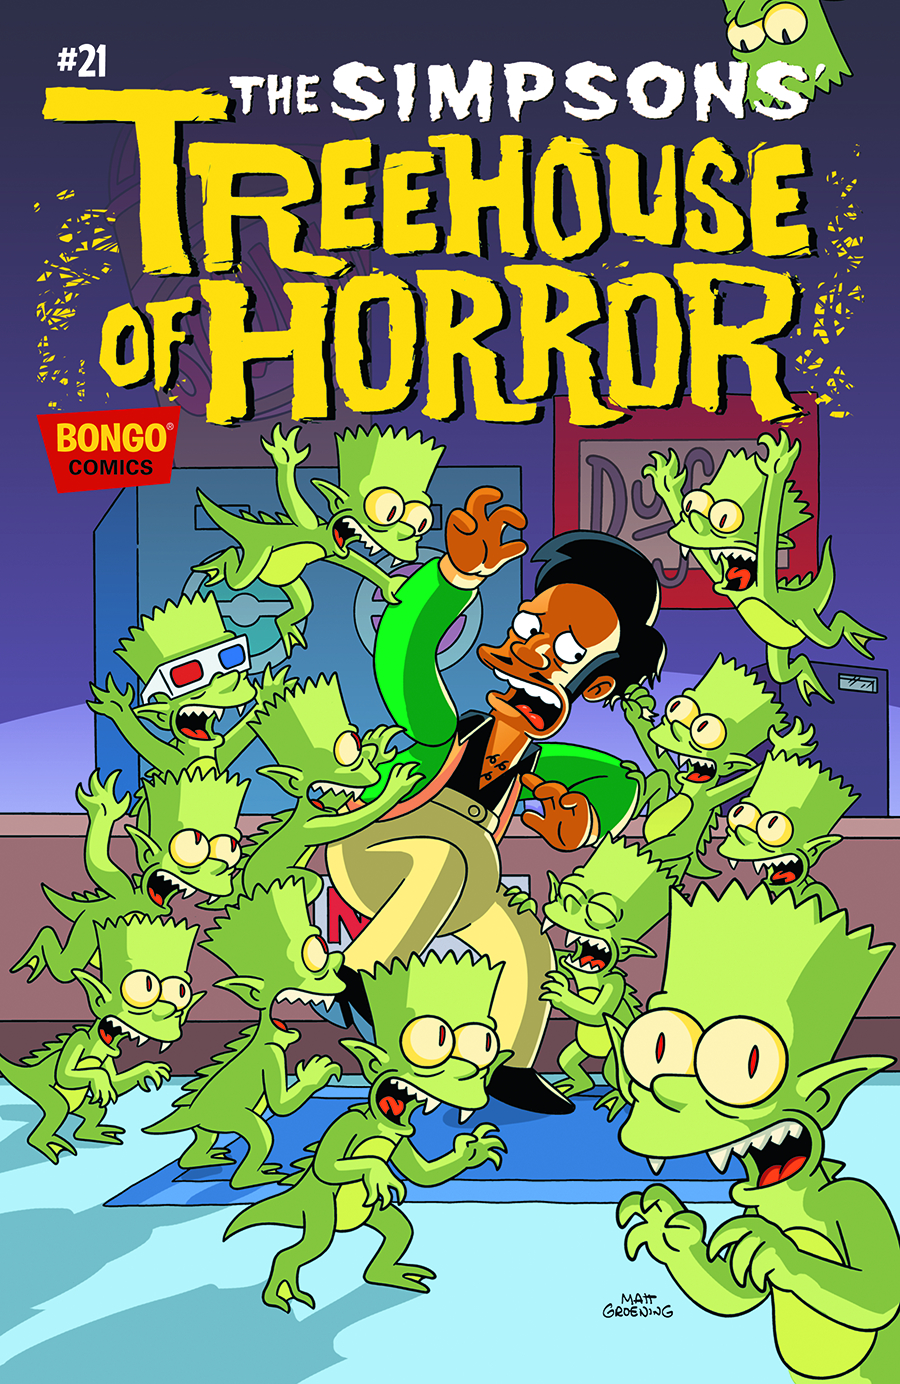 SIMPSONS TREEHOUSE OF HORROR #21